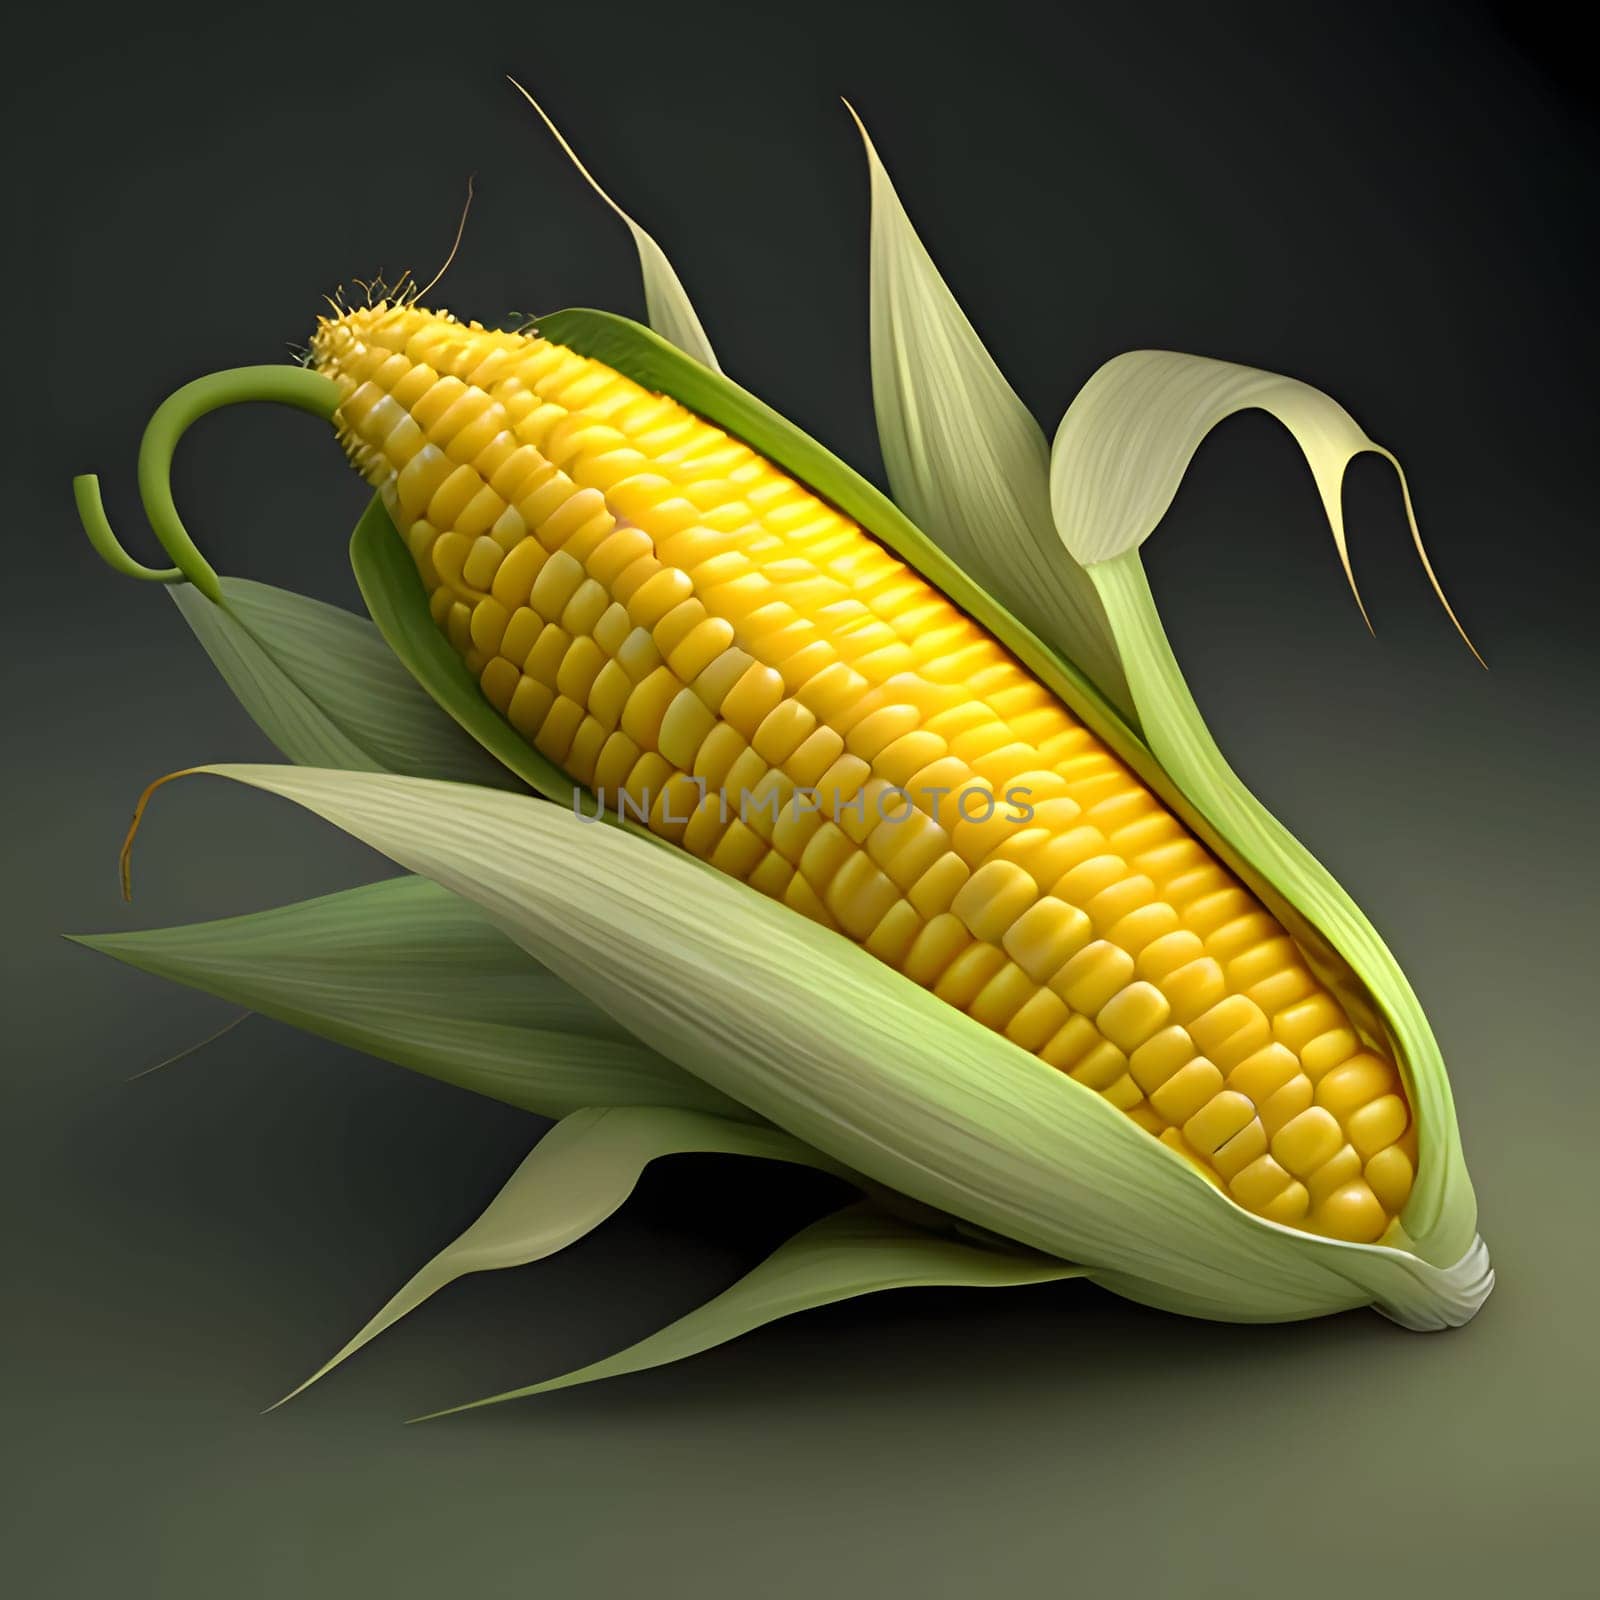 Yellow corn cob with green leaves on a solid dark background. Corn as a dish of thanksgiving for the harvest. by ThemesS